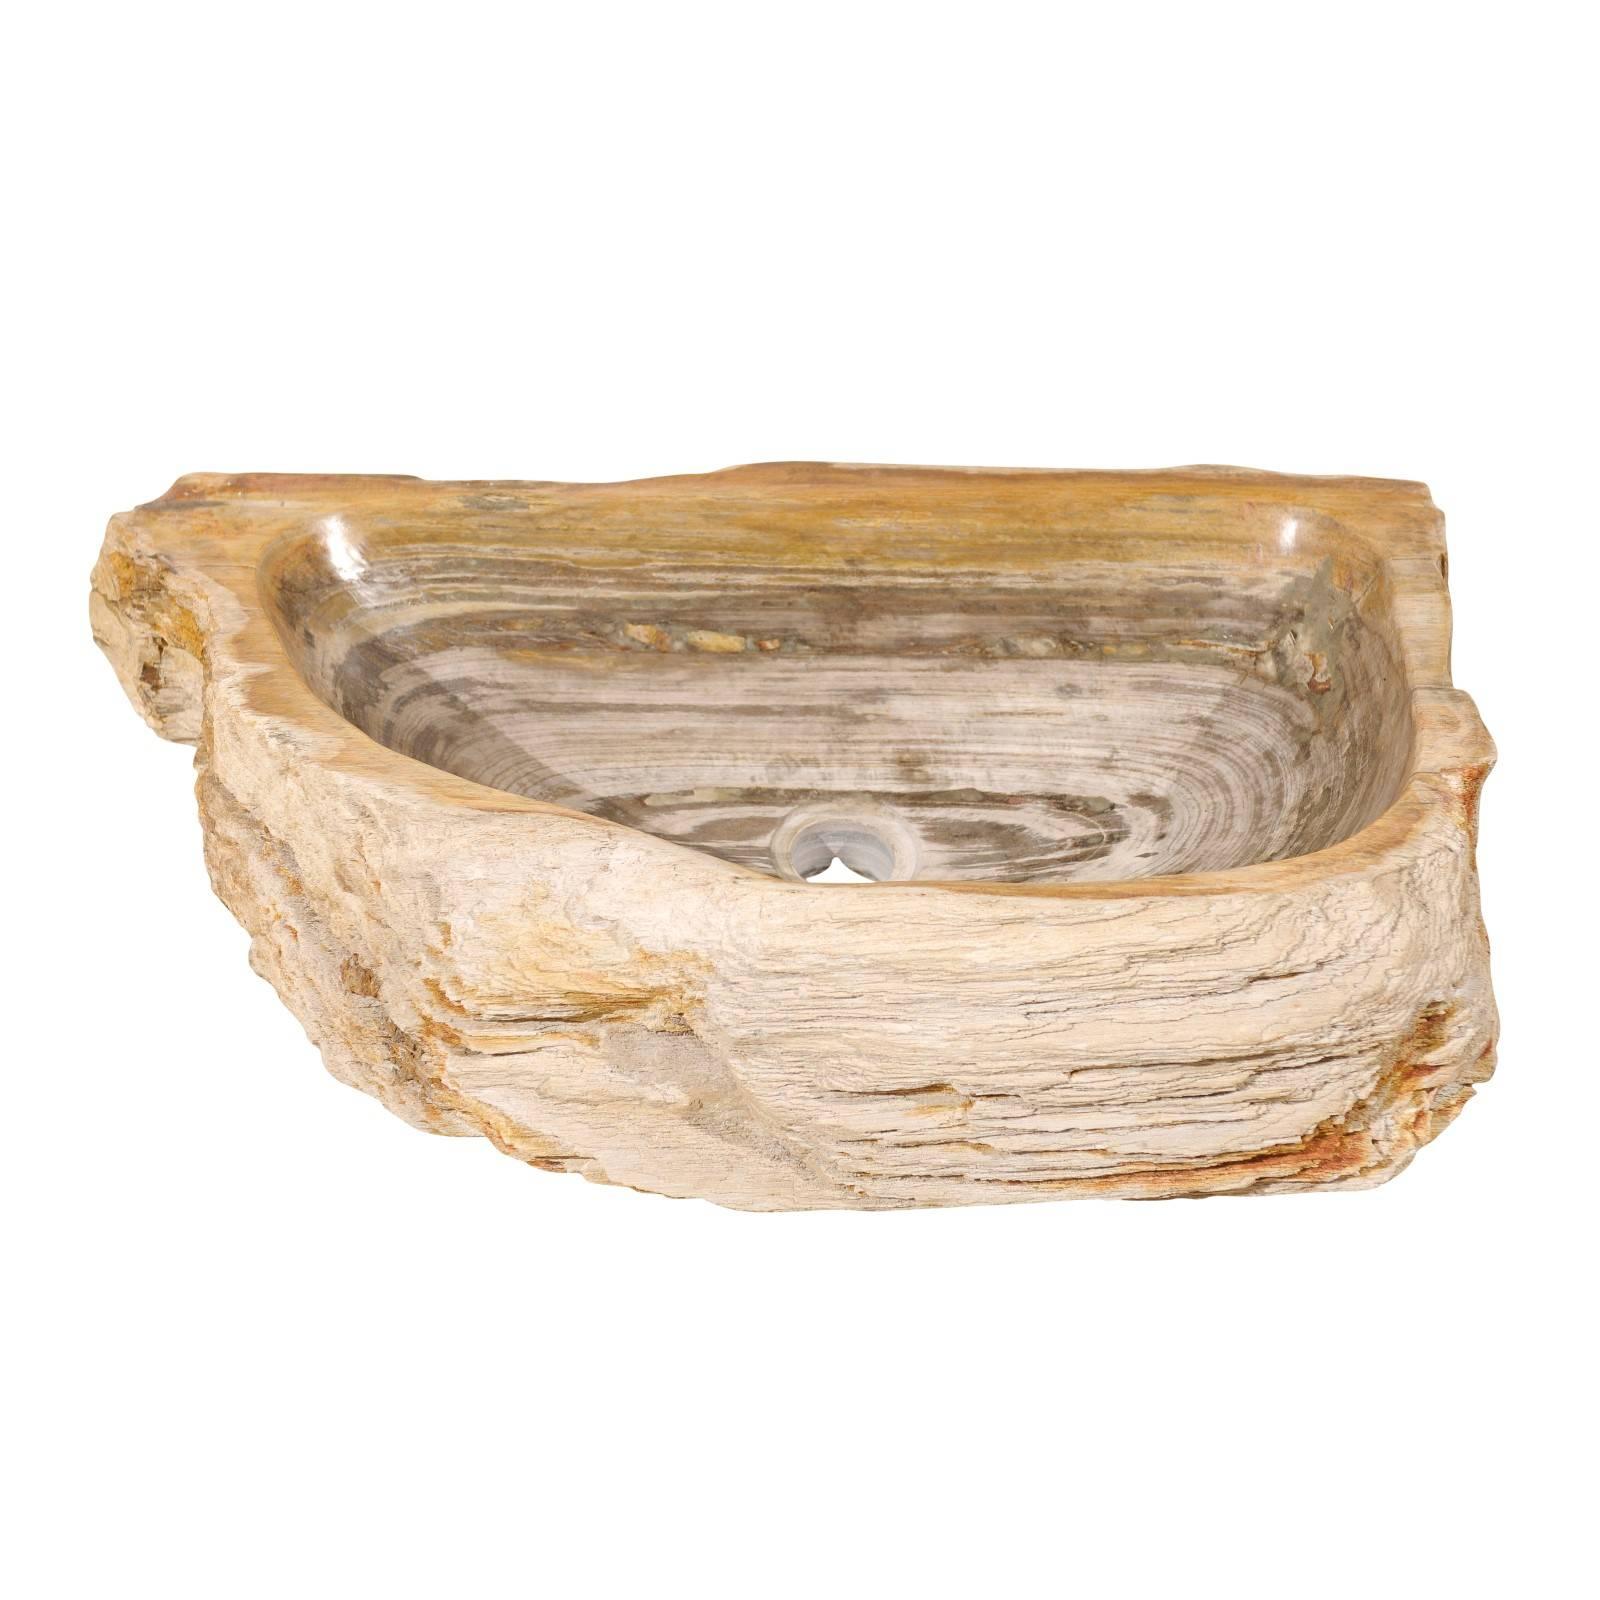 Oblong Petrified Wood Sink in Neutral Light Cream Color with Beige / Grey Colors